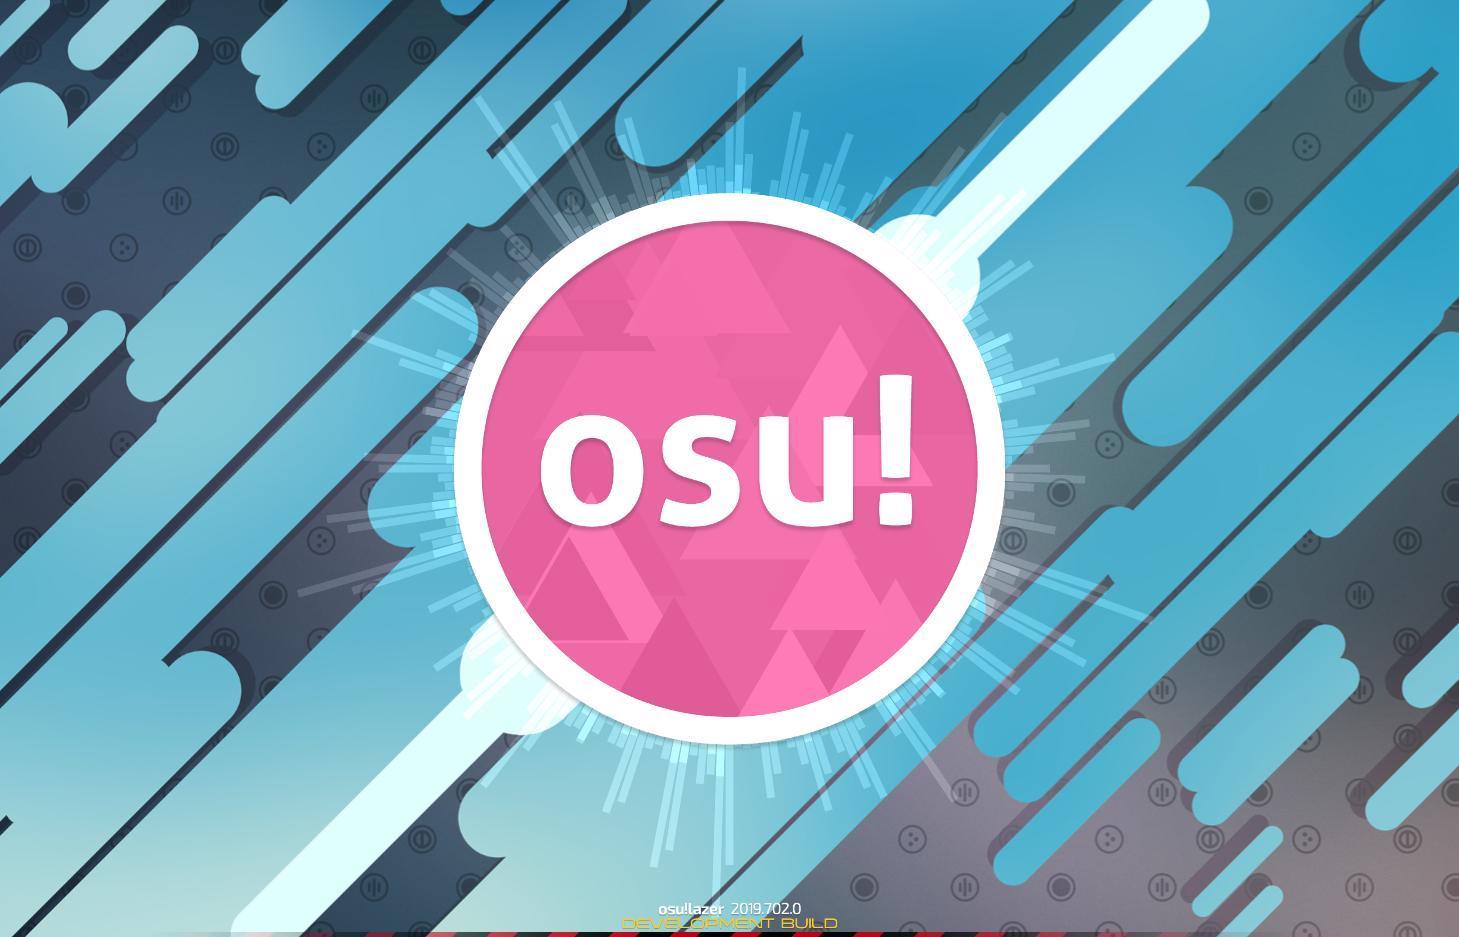 osu android download